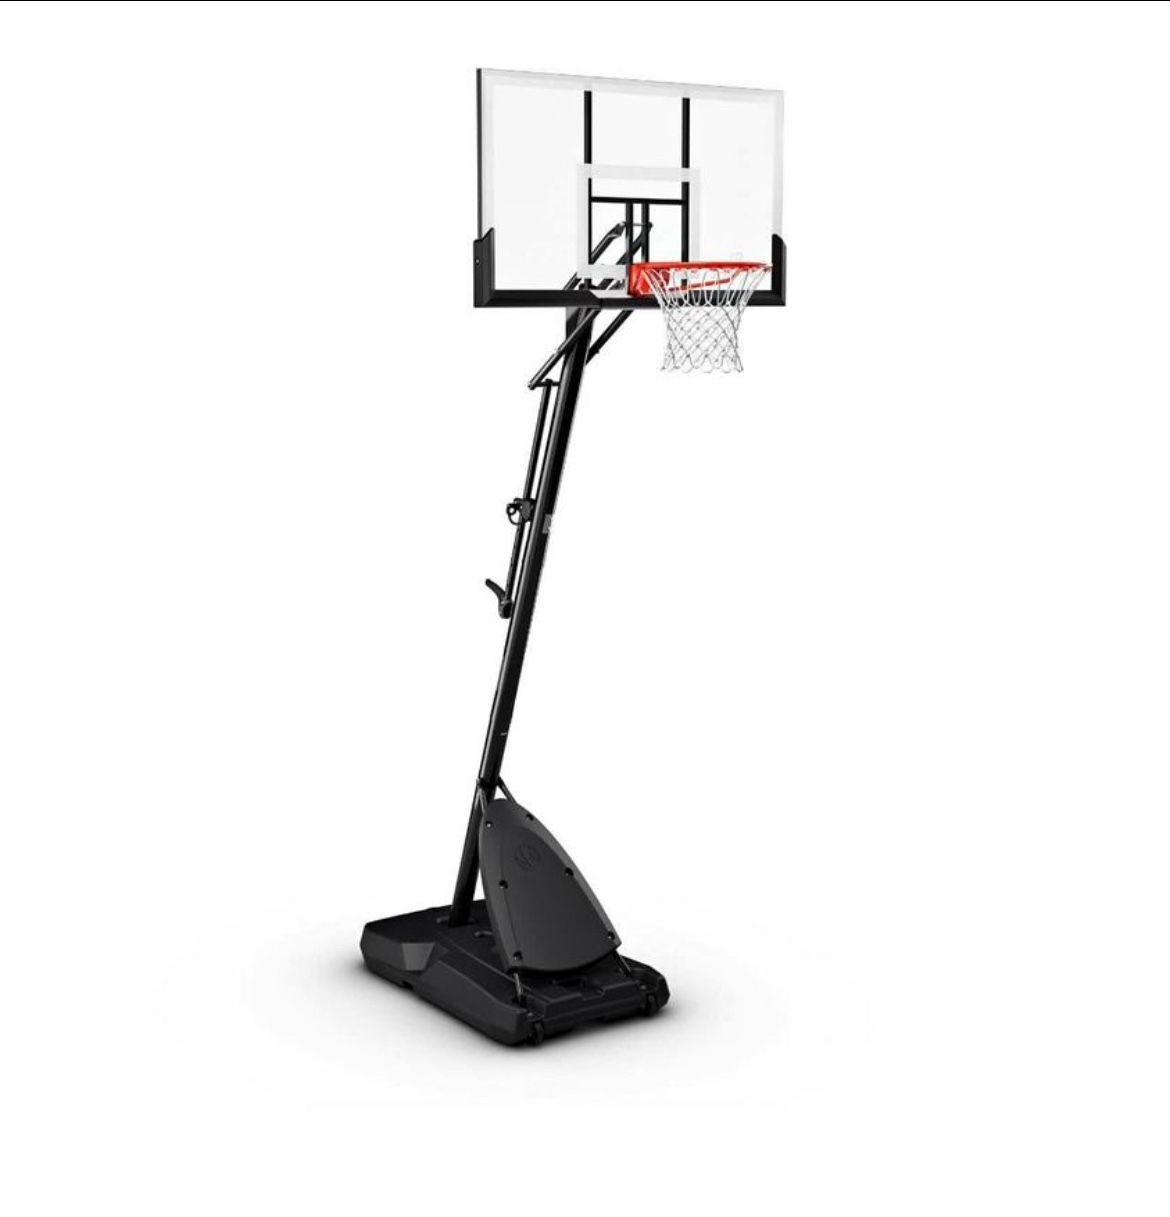 54 In. Shatter-proof Polycarbonate Exacta height® Portable Basketball Hoop System